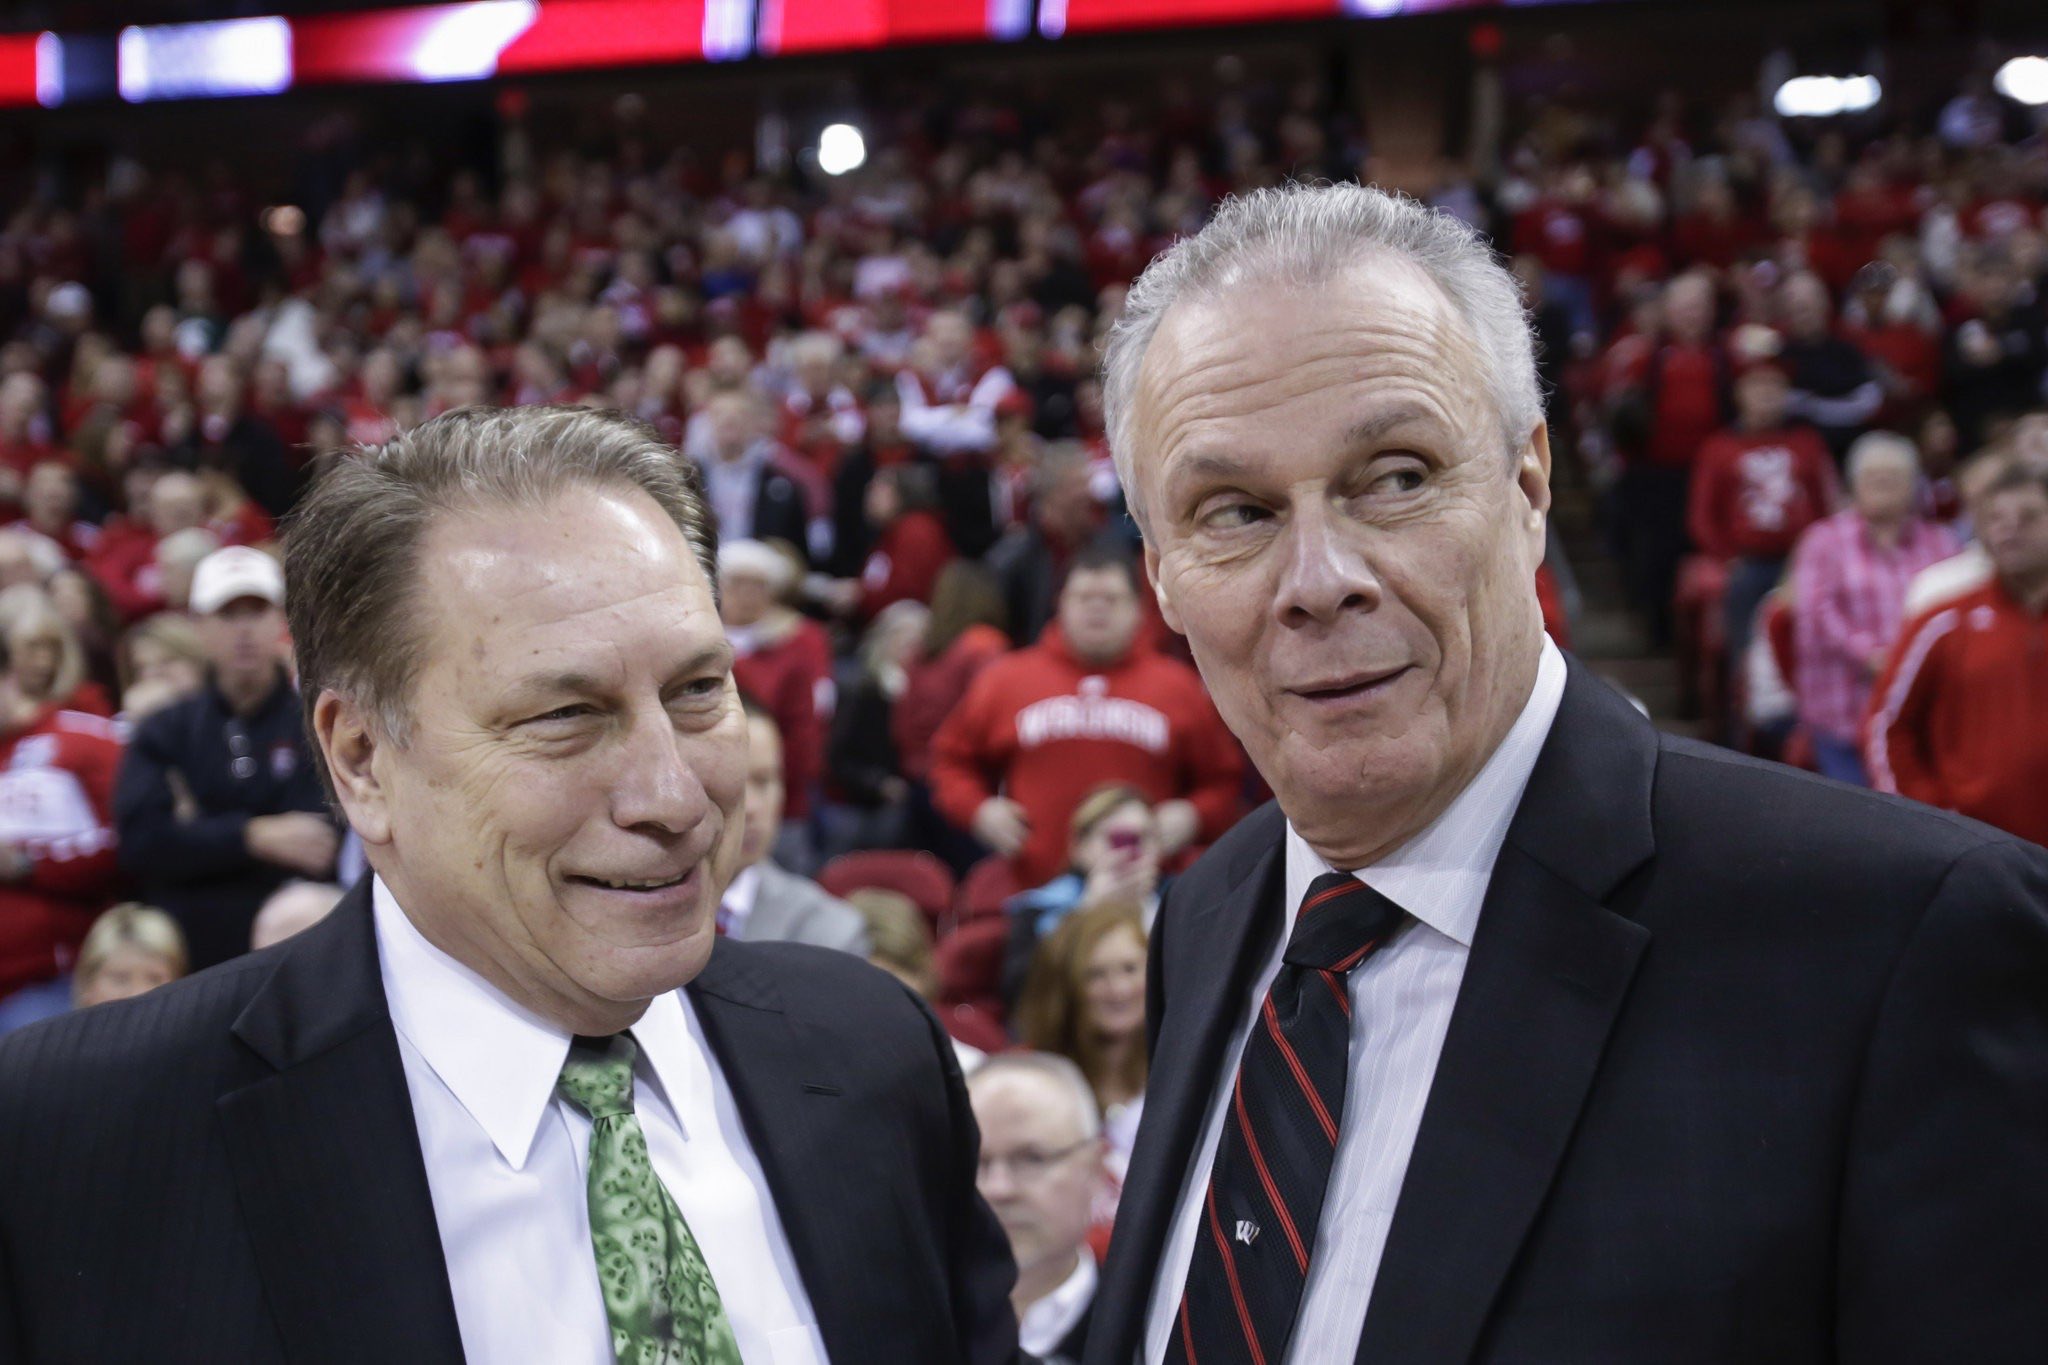 Happy 75th birthday to the , Bo Ryan! 

Here he is pictured with his son: 